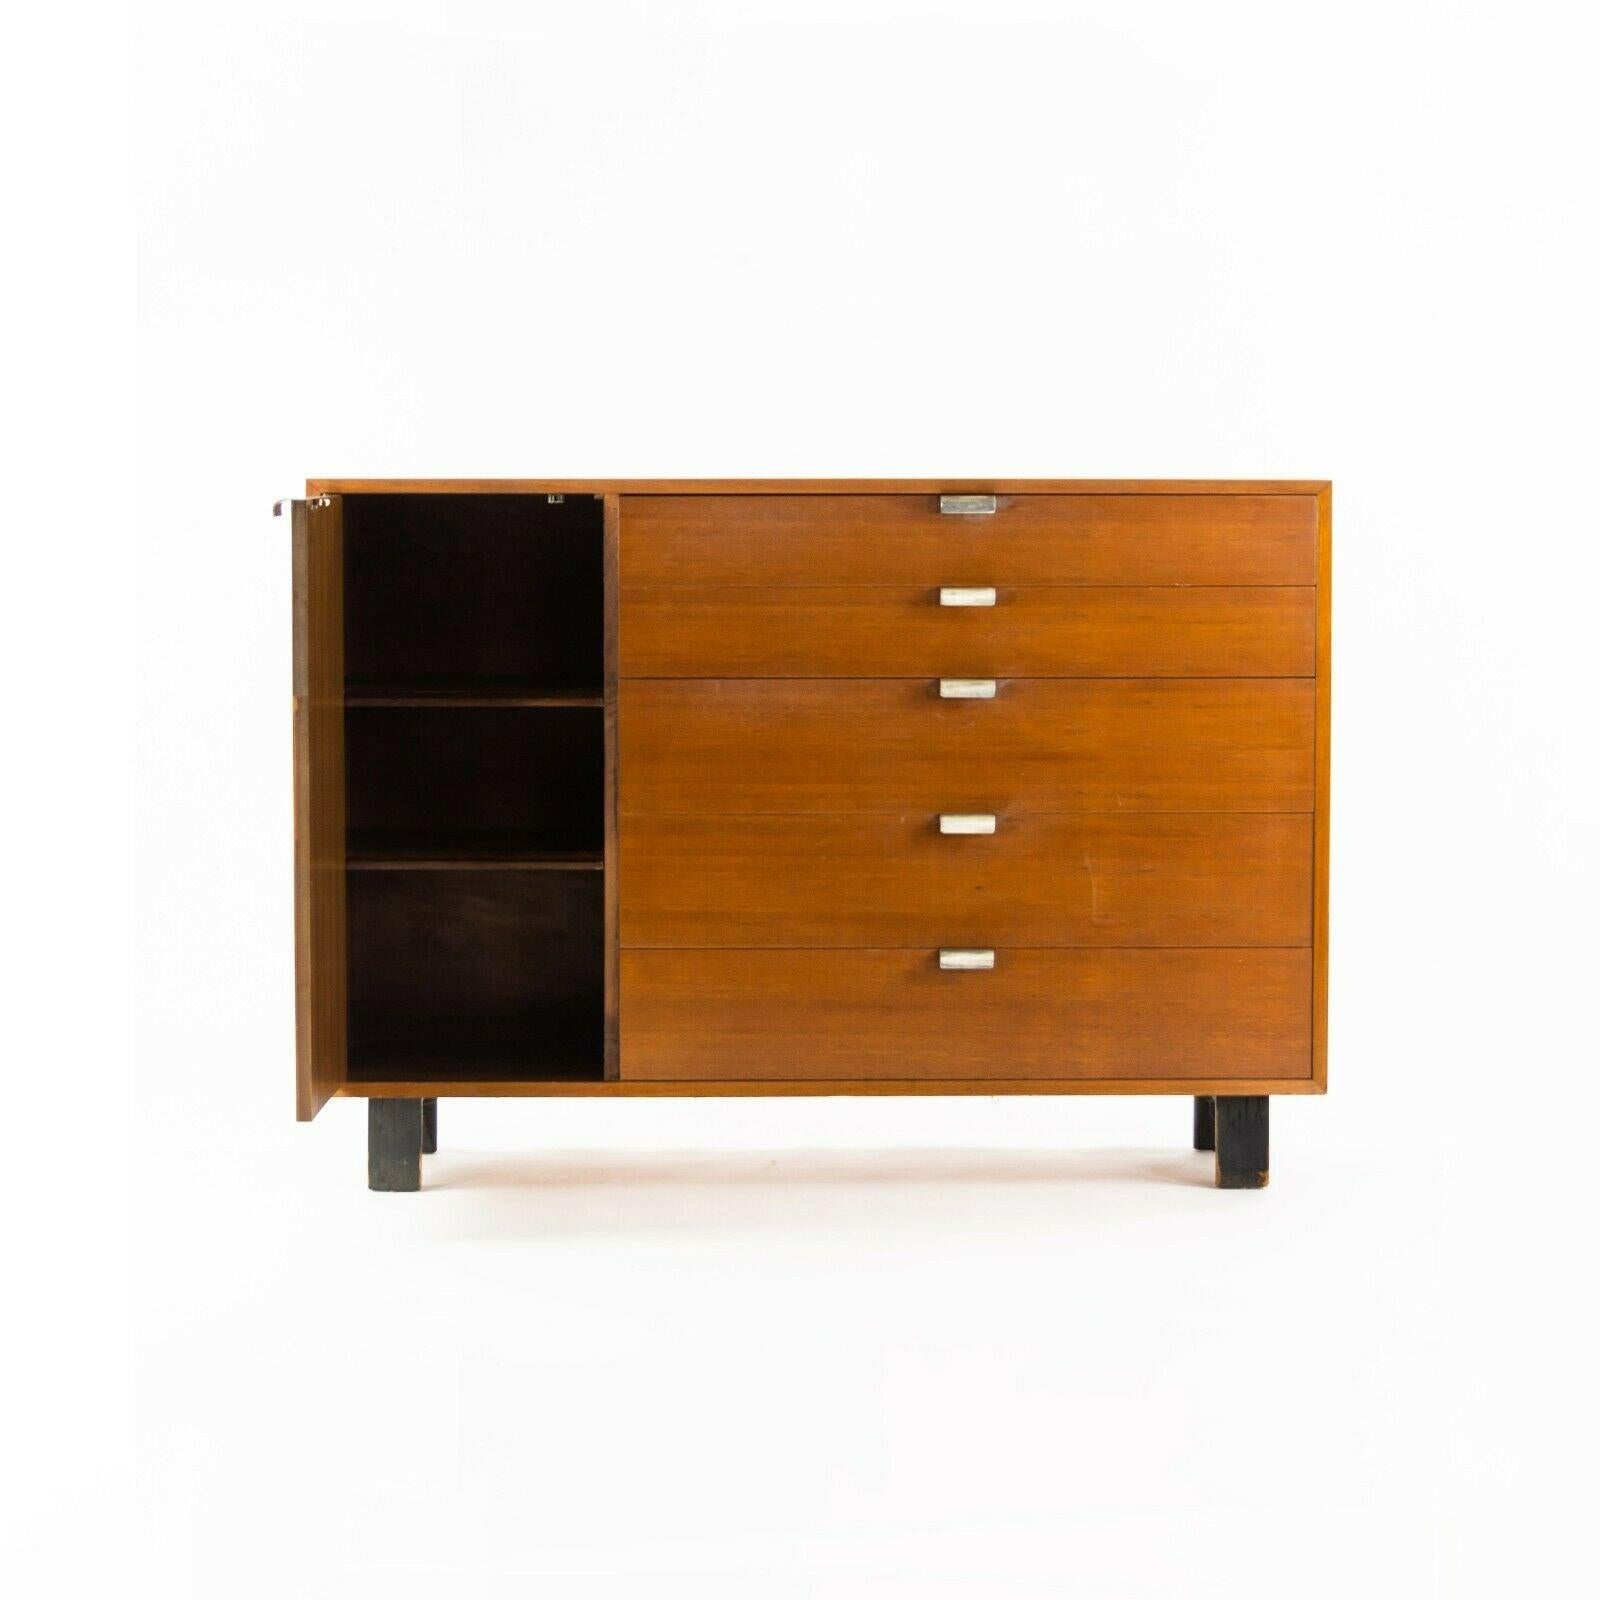 Listed for sale is a circa 1954 George Nelson for Herman Miller Model 4936 5-Drawer Basic Cabinet Series dresser / credenza. This is a delightfully original piece. The condition overall is very good to excellent for a vintage example with some wear